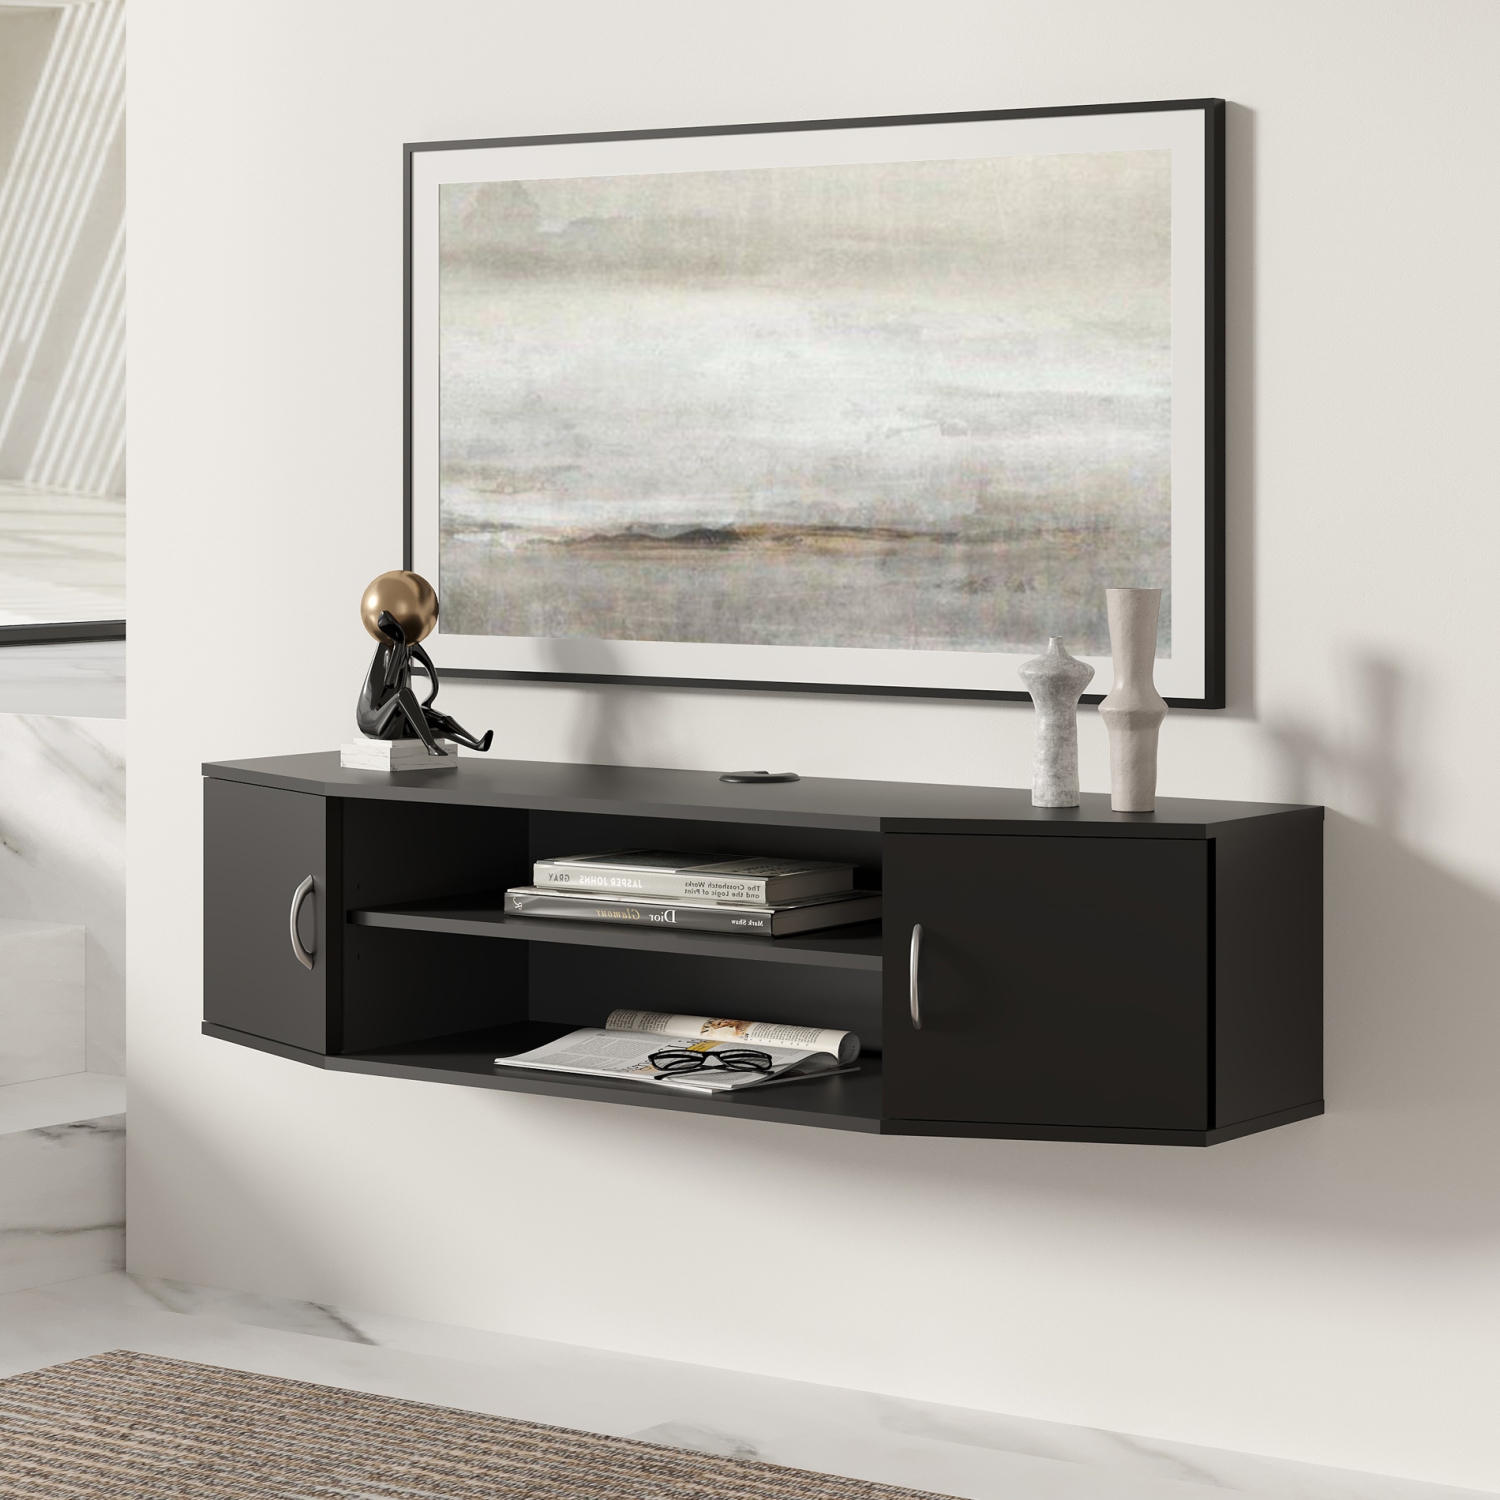 FITUEYES Wall Mounted TV Media Console with Doors Desk Storage Hutch